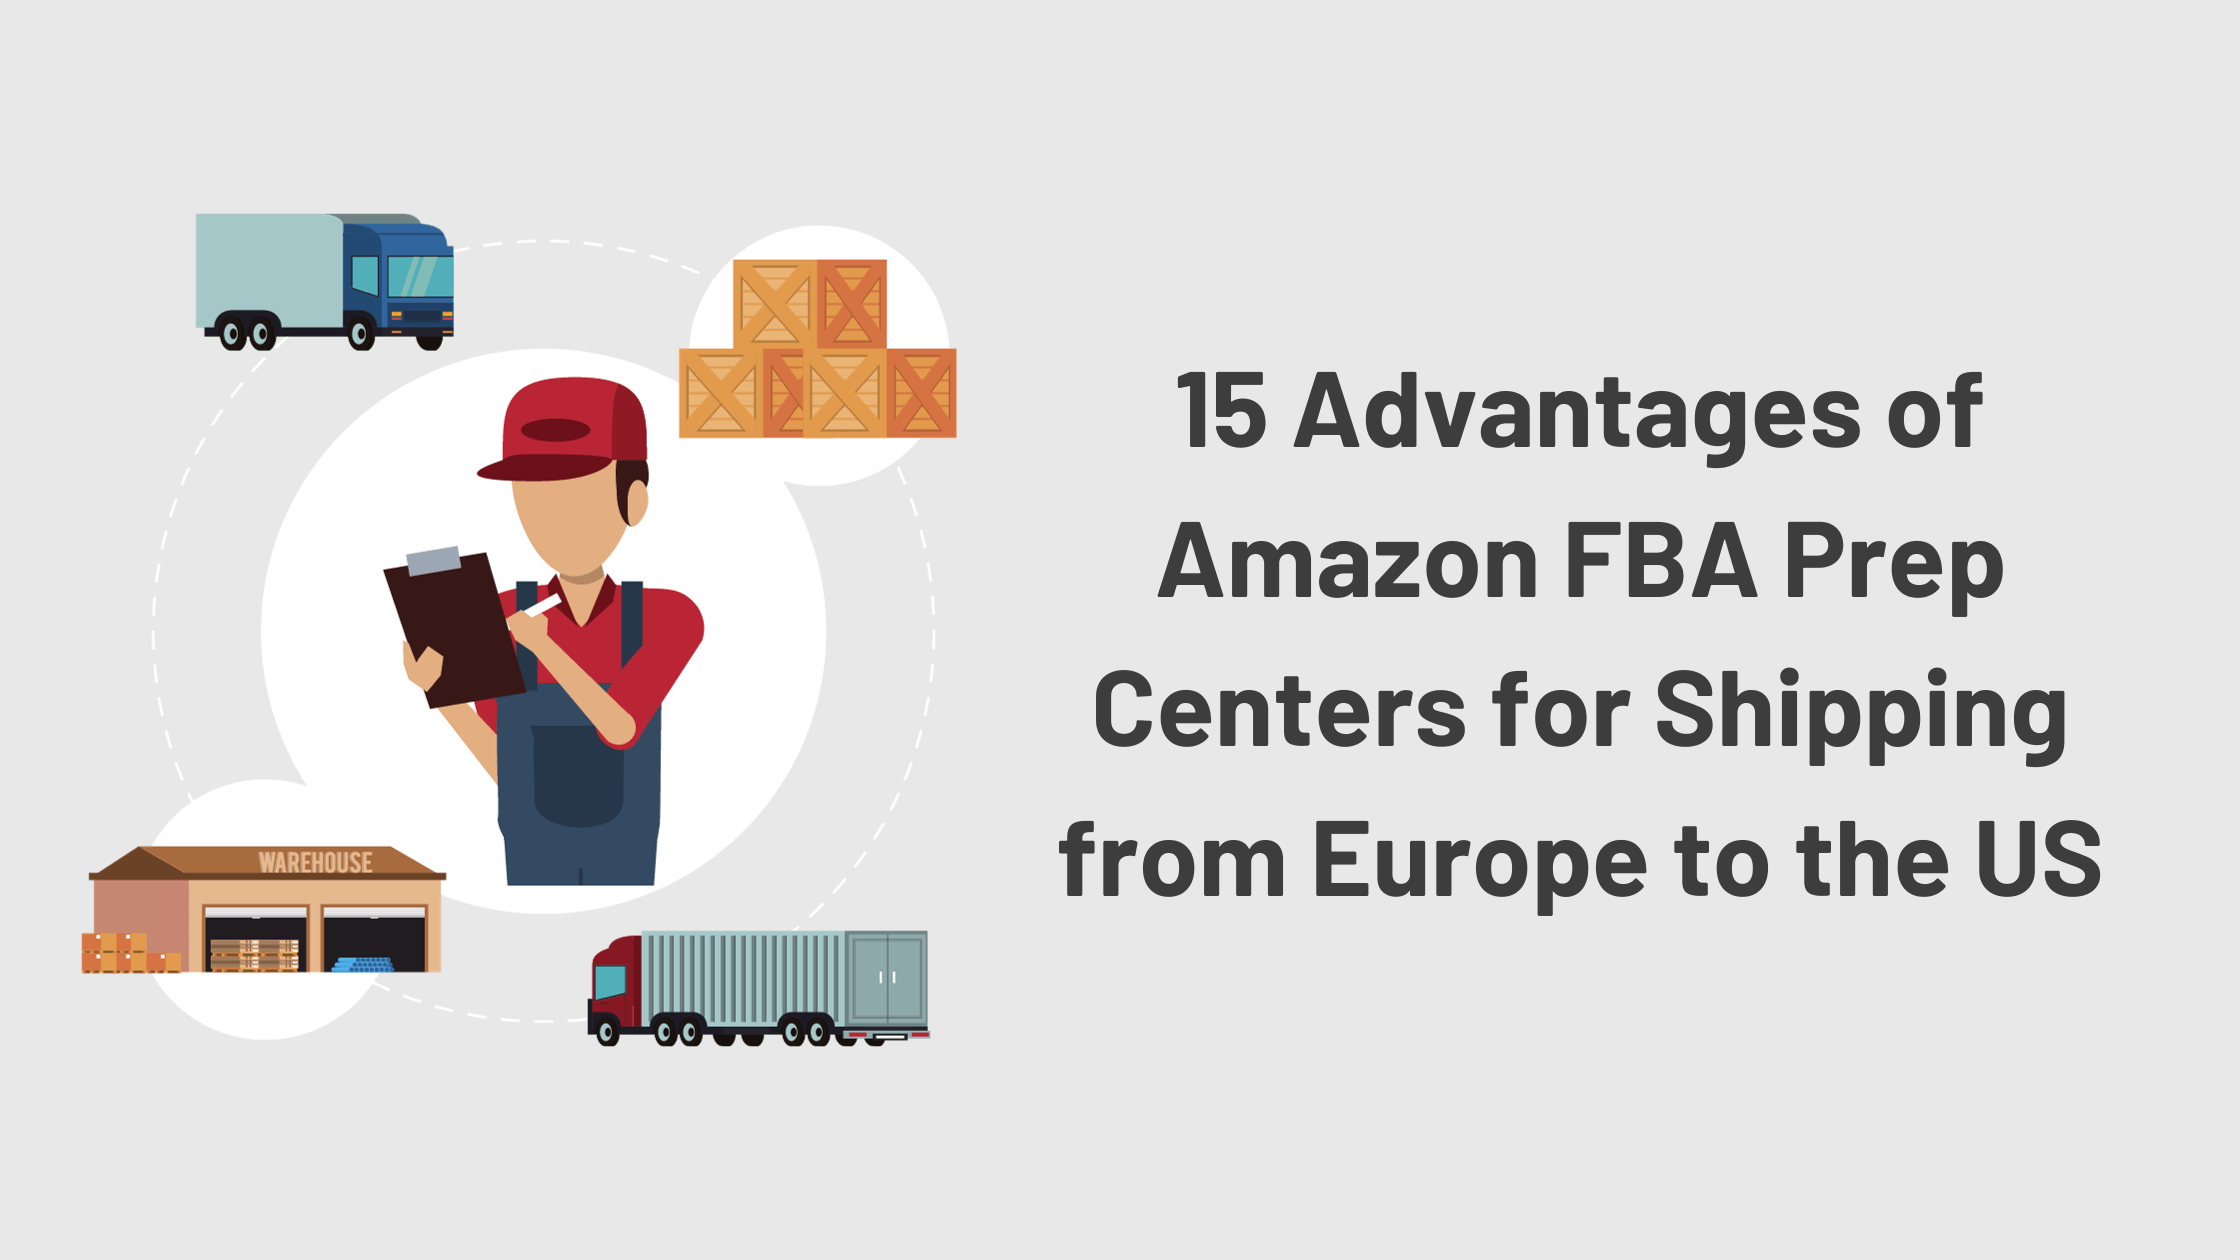 Advantages of Amazon FBA Prep Centers for Shipping from Europe to the US